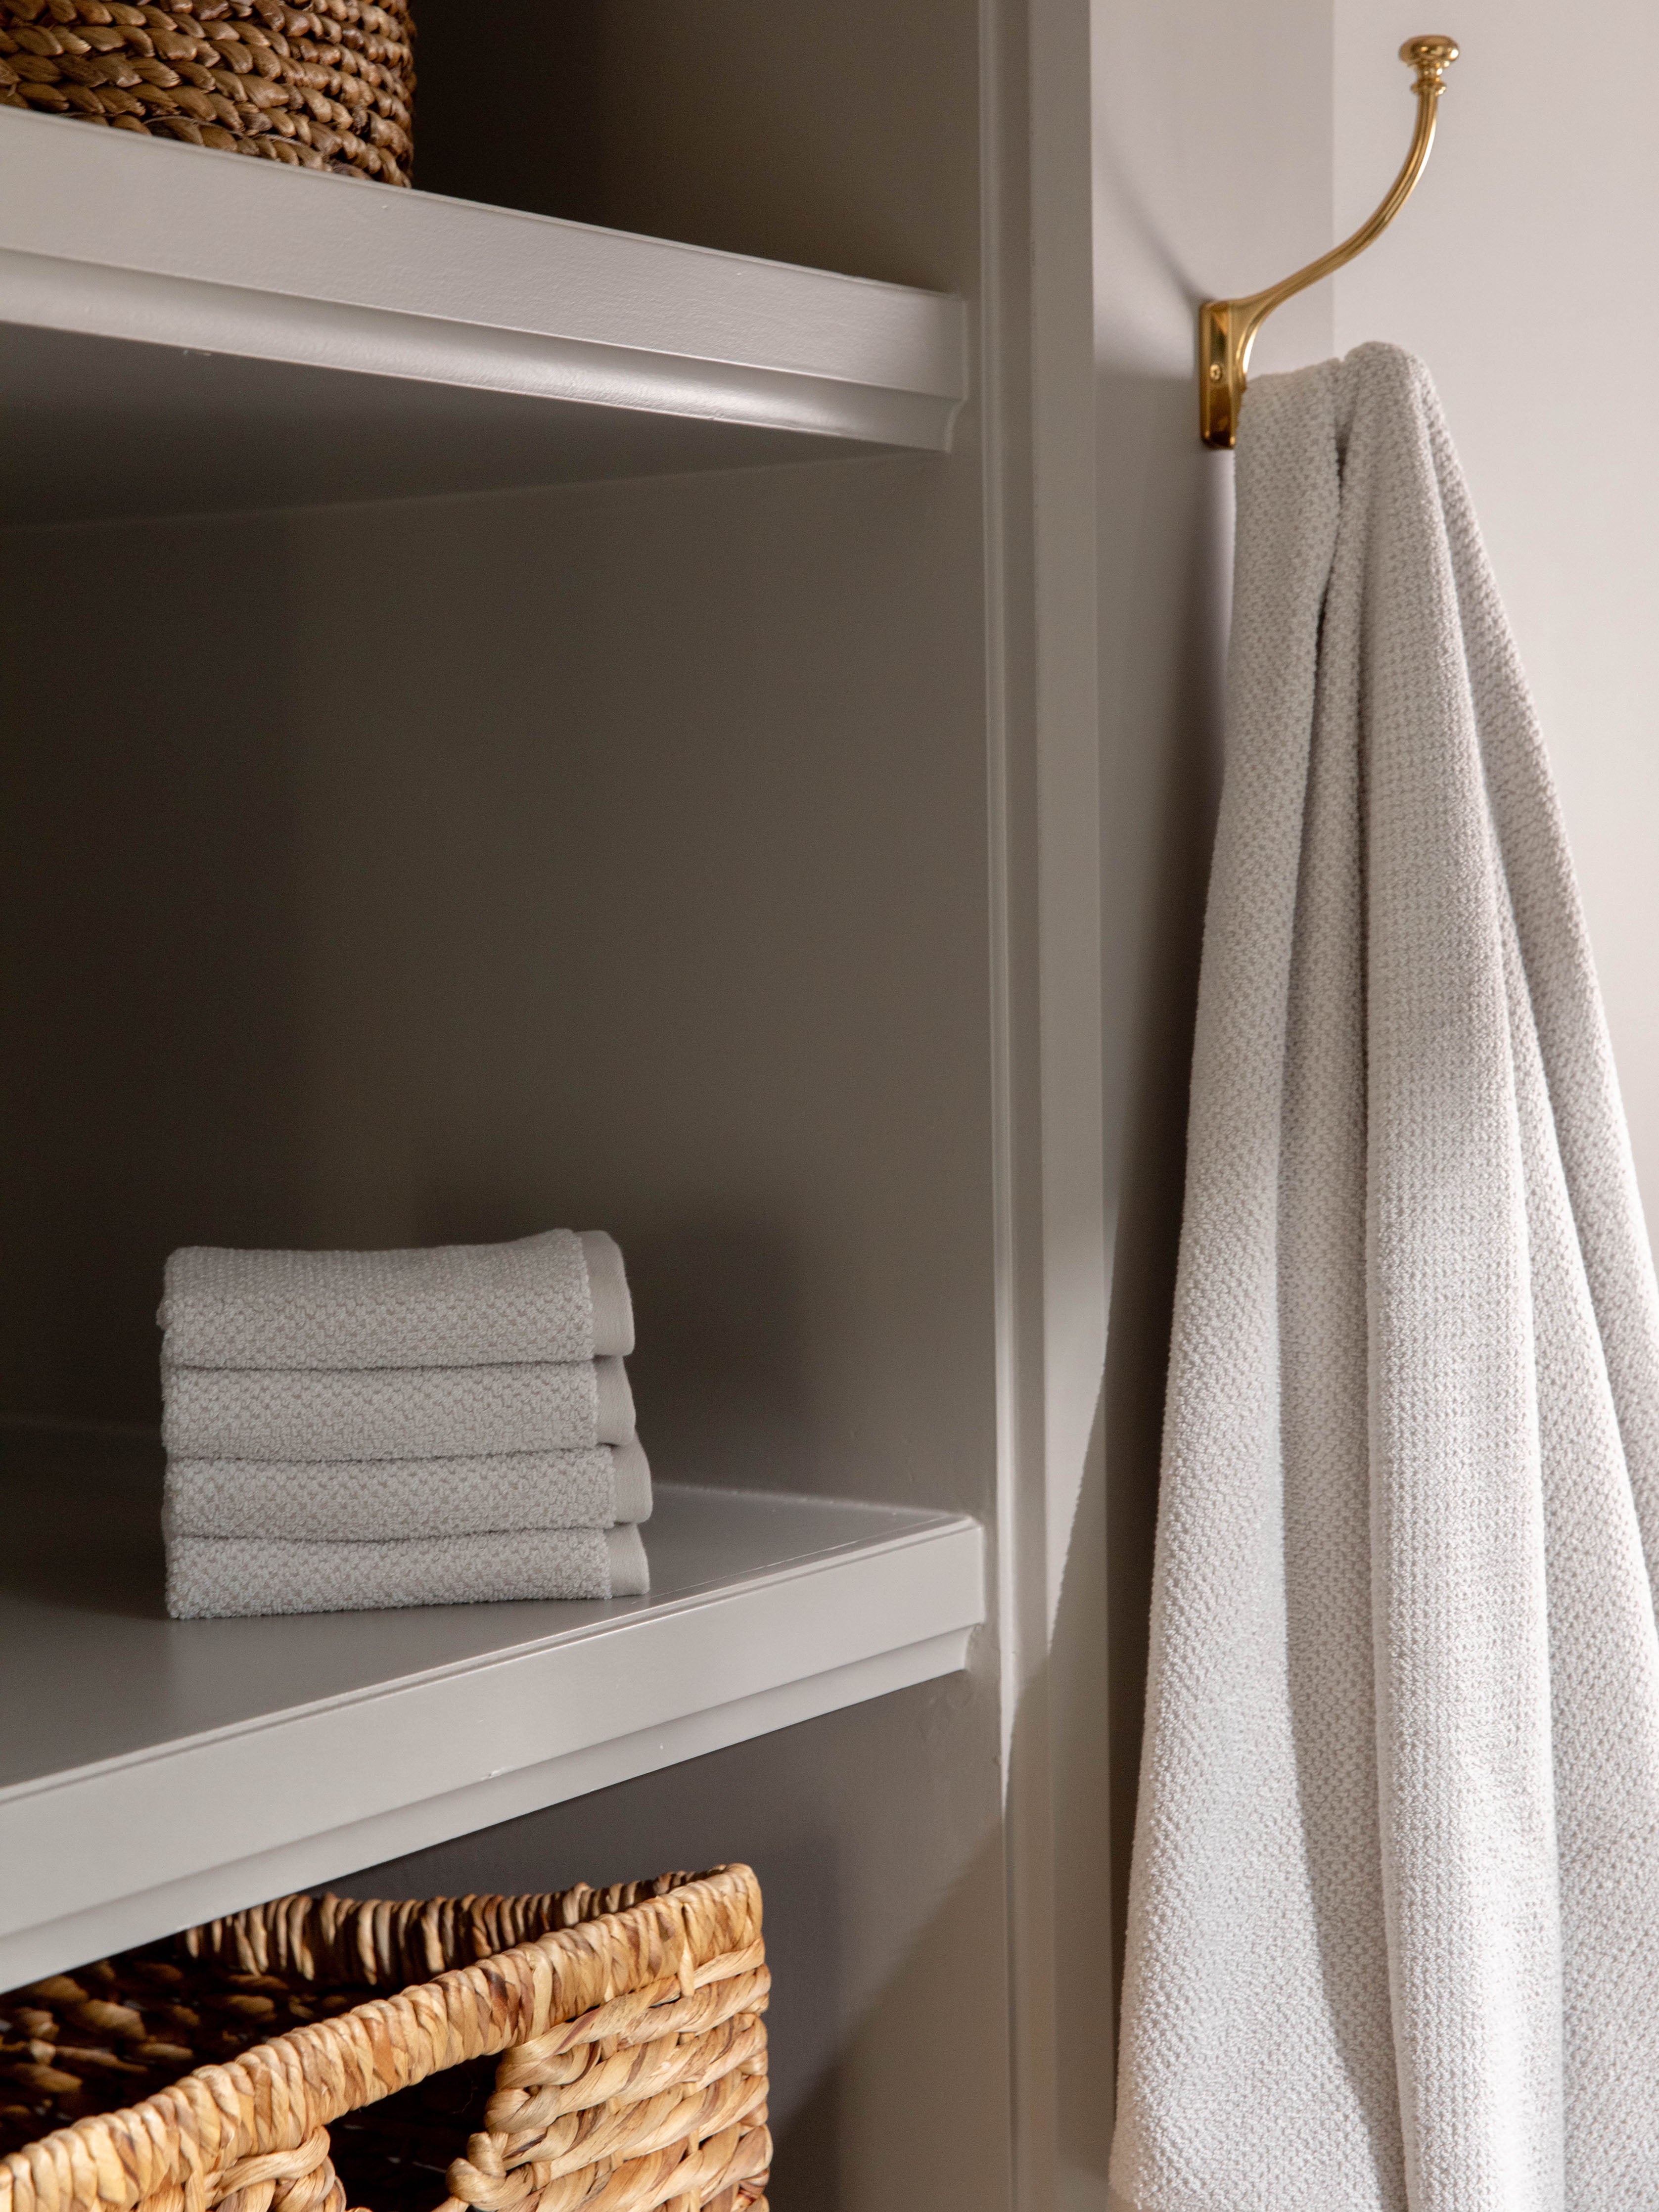 Complete Nantucket Bath Bundle in the color Heathered Light Grey. Photo of Complete Nantucket Bath Bundle taken as the hand towels, wash clothes, and bath towels are neatly placed on shelves in a bathroom. |Color:Heathered Light Grey